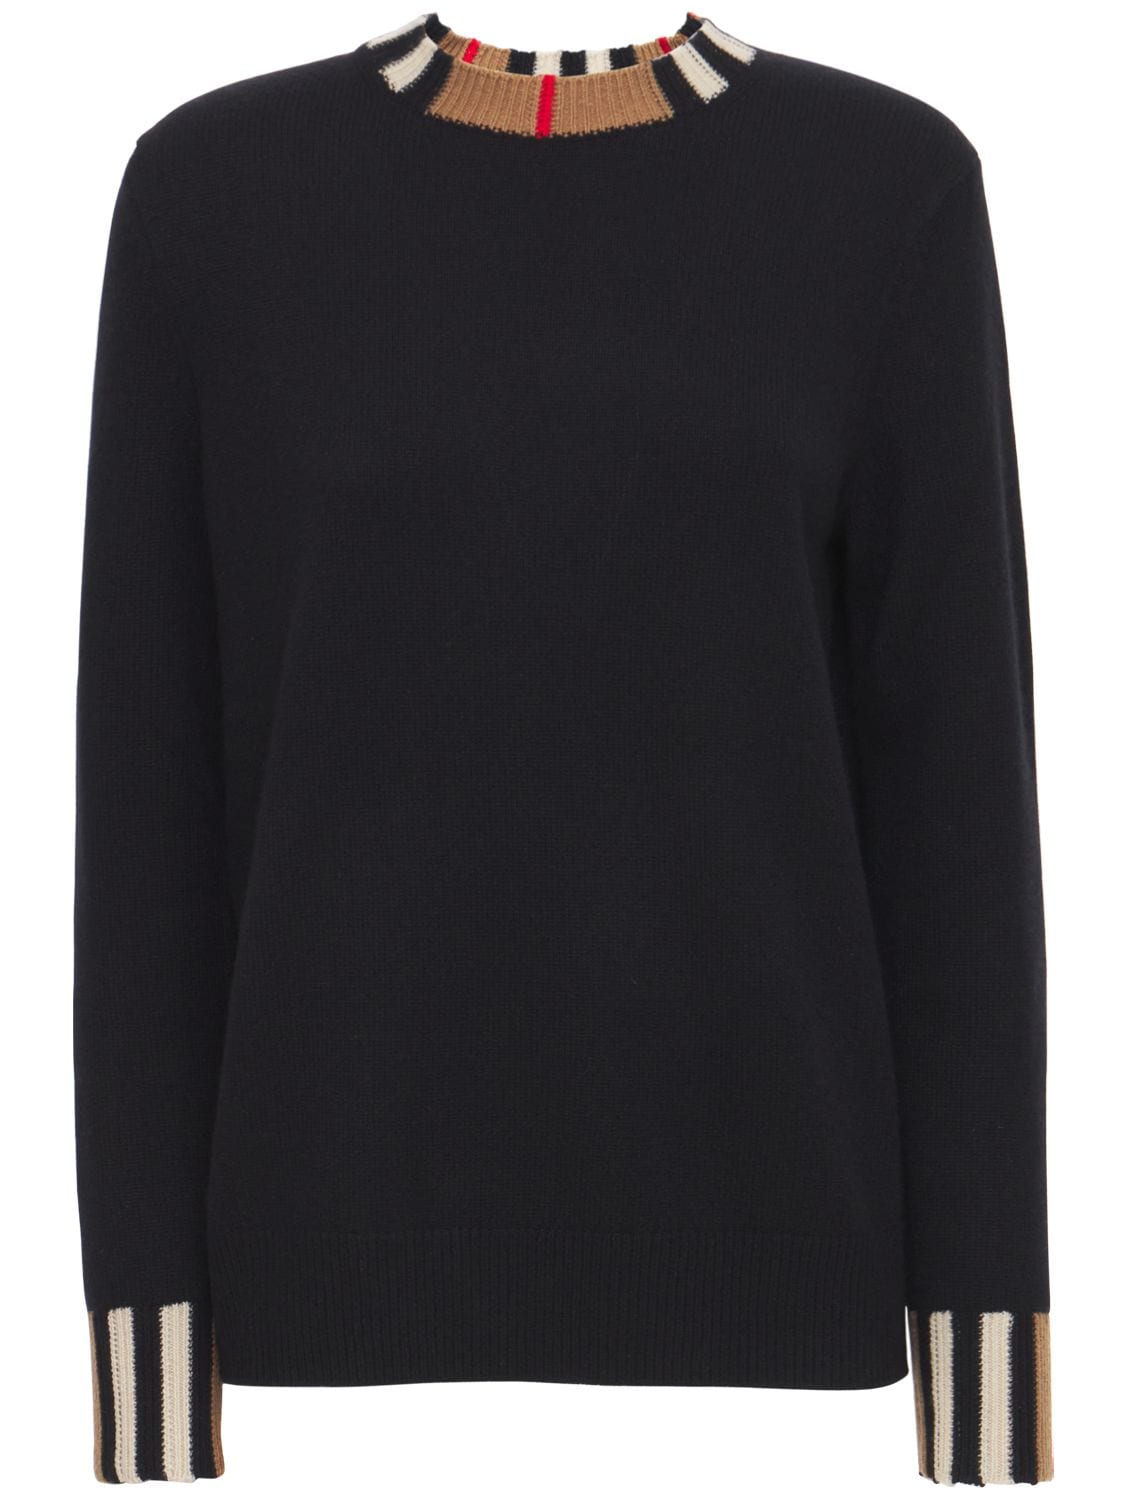 Eyre Cashmere Knit Sweater